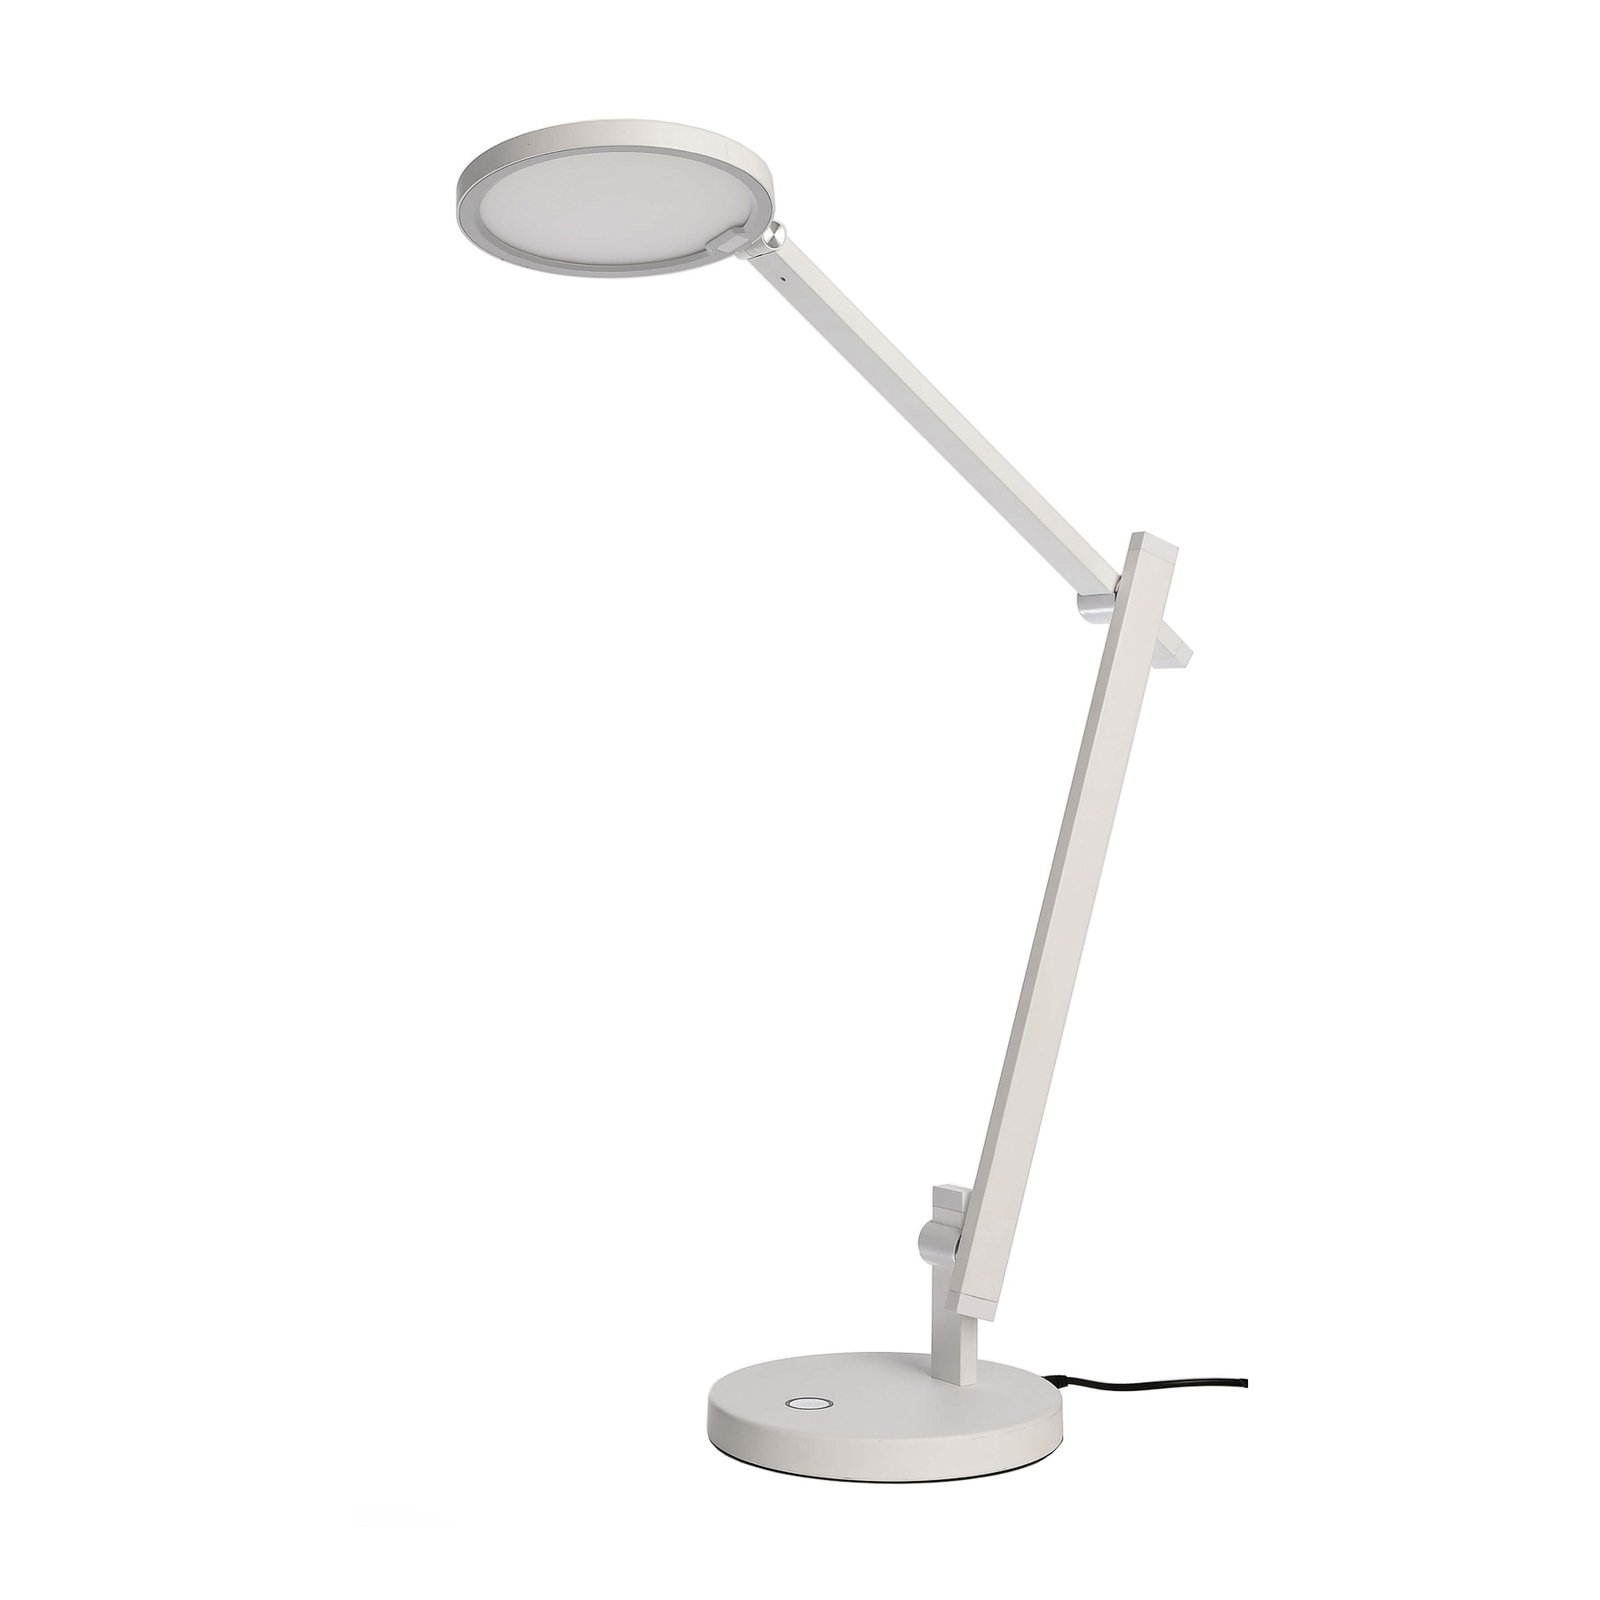 Adhara LED desk lamp, dimmable to 3 levels, white